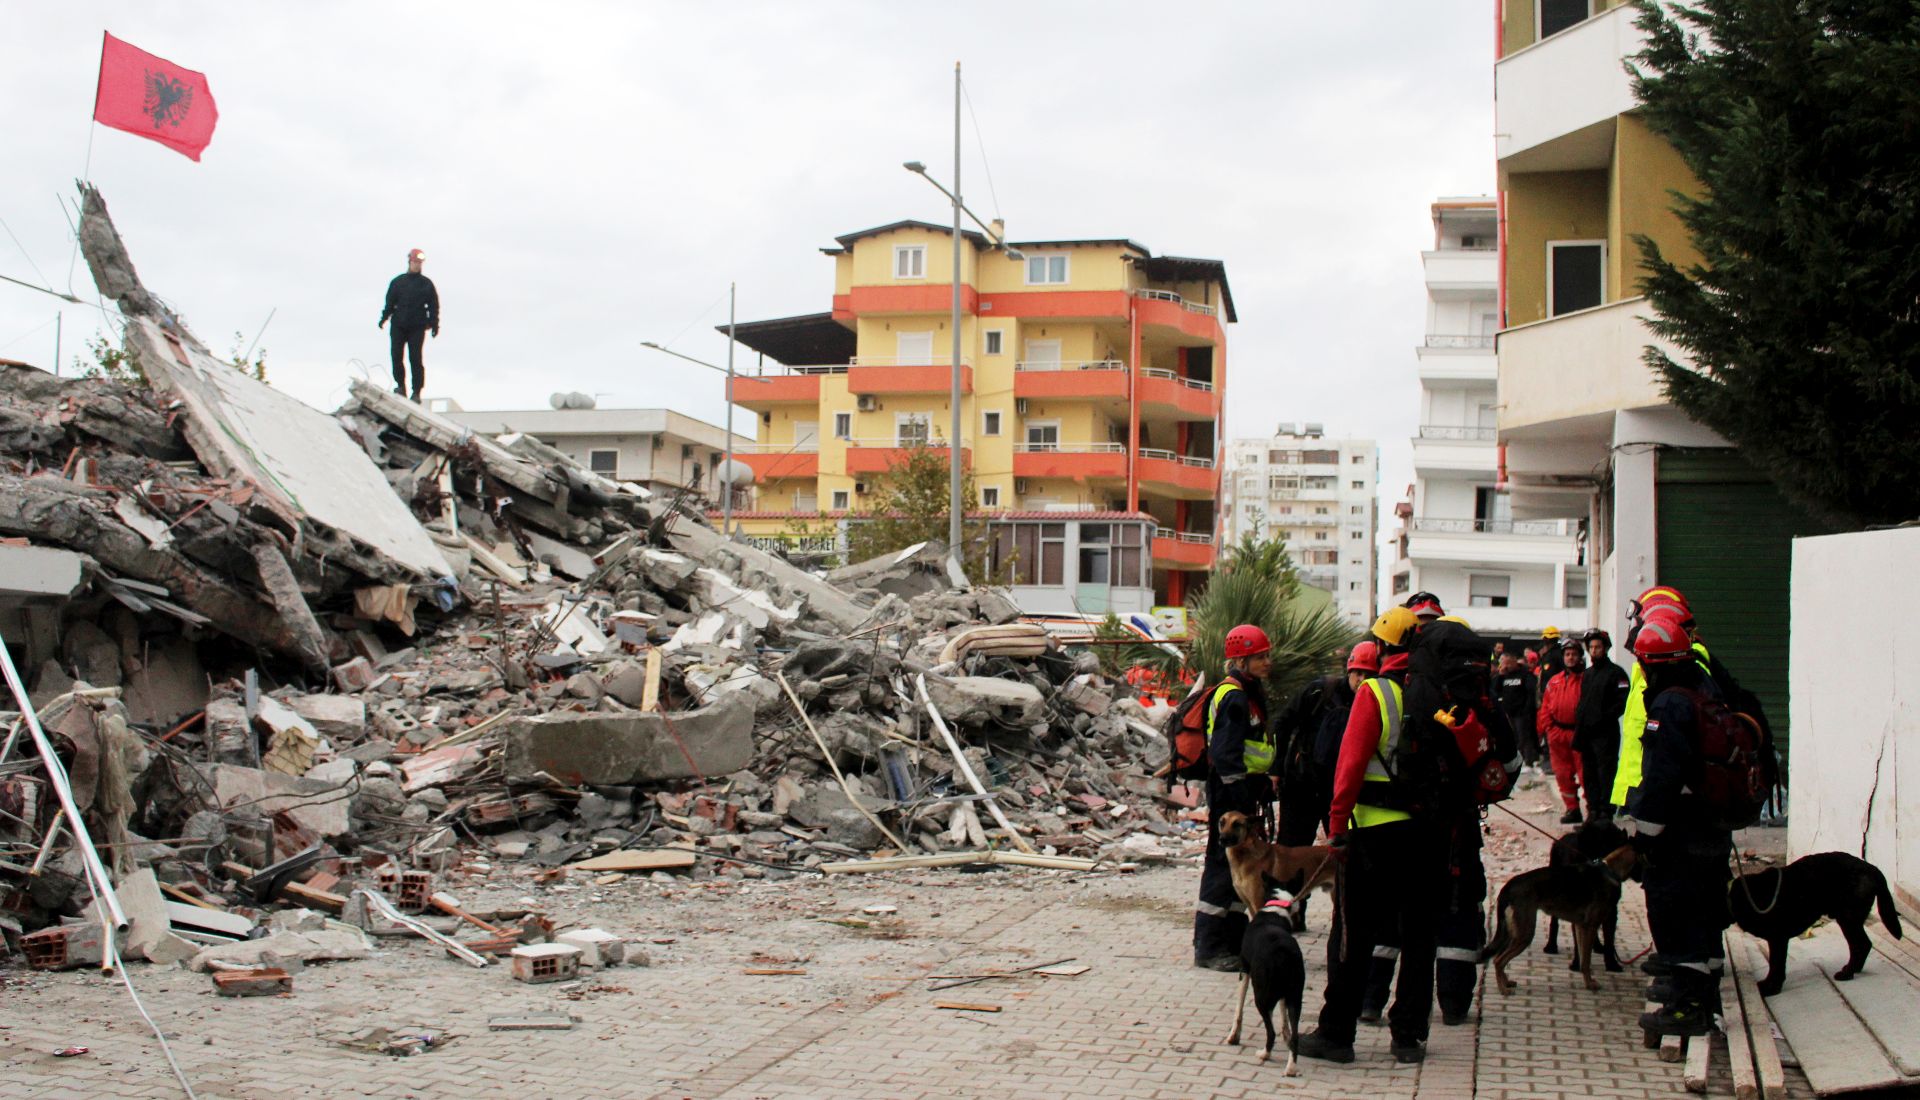 epa08031105 Search and rescue team from Croatia search in the rubble of a building after an earthquake hit Durres, Albania, 28 November 2019. Albania was hit by a 6.4 magnitude earthquake on 26 November 2019, leaving at least 41 people dead and dozens injured.  EPA/MALTON DIBRA